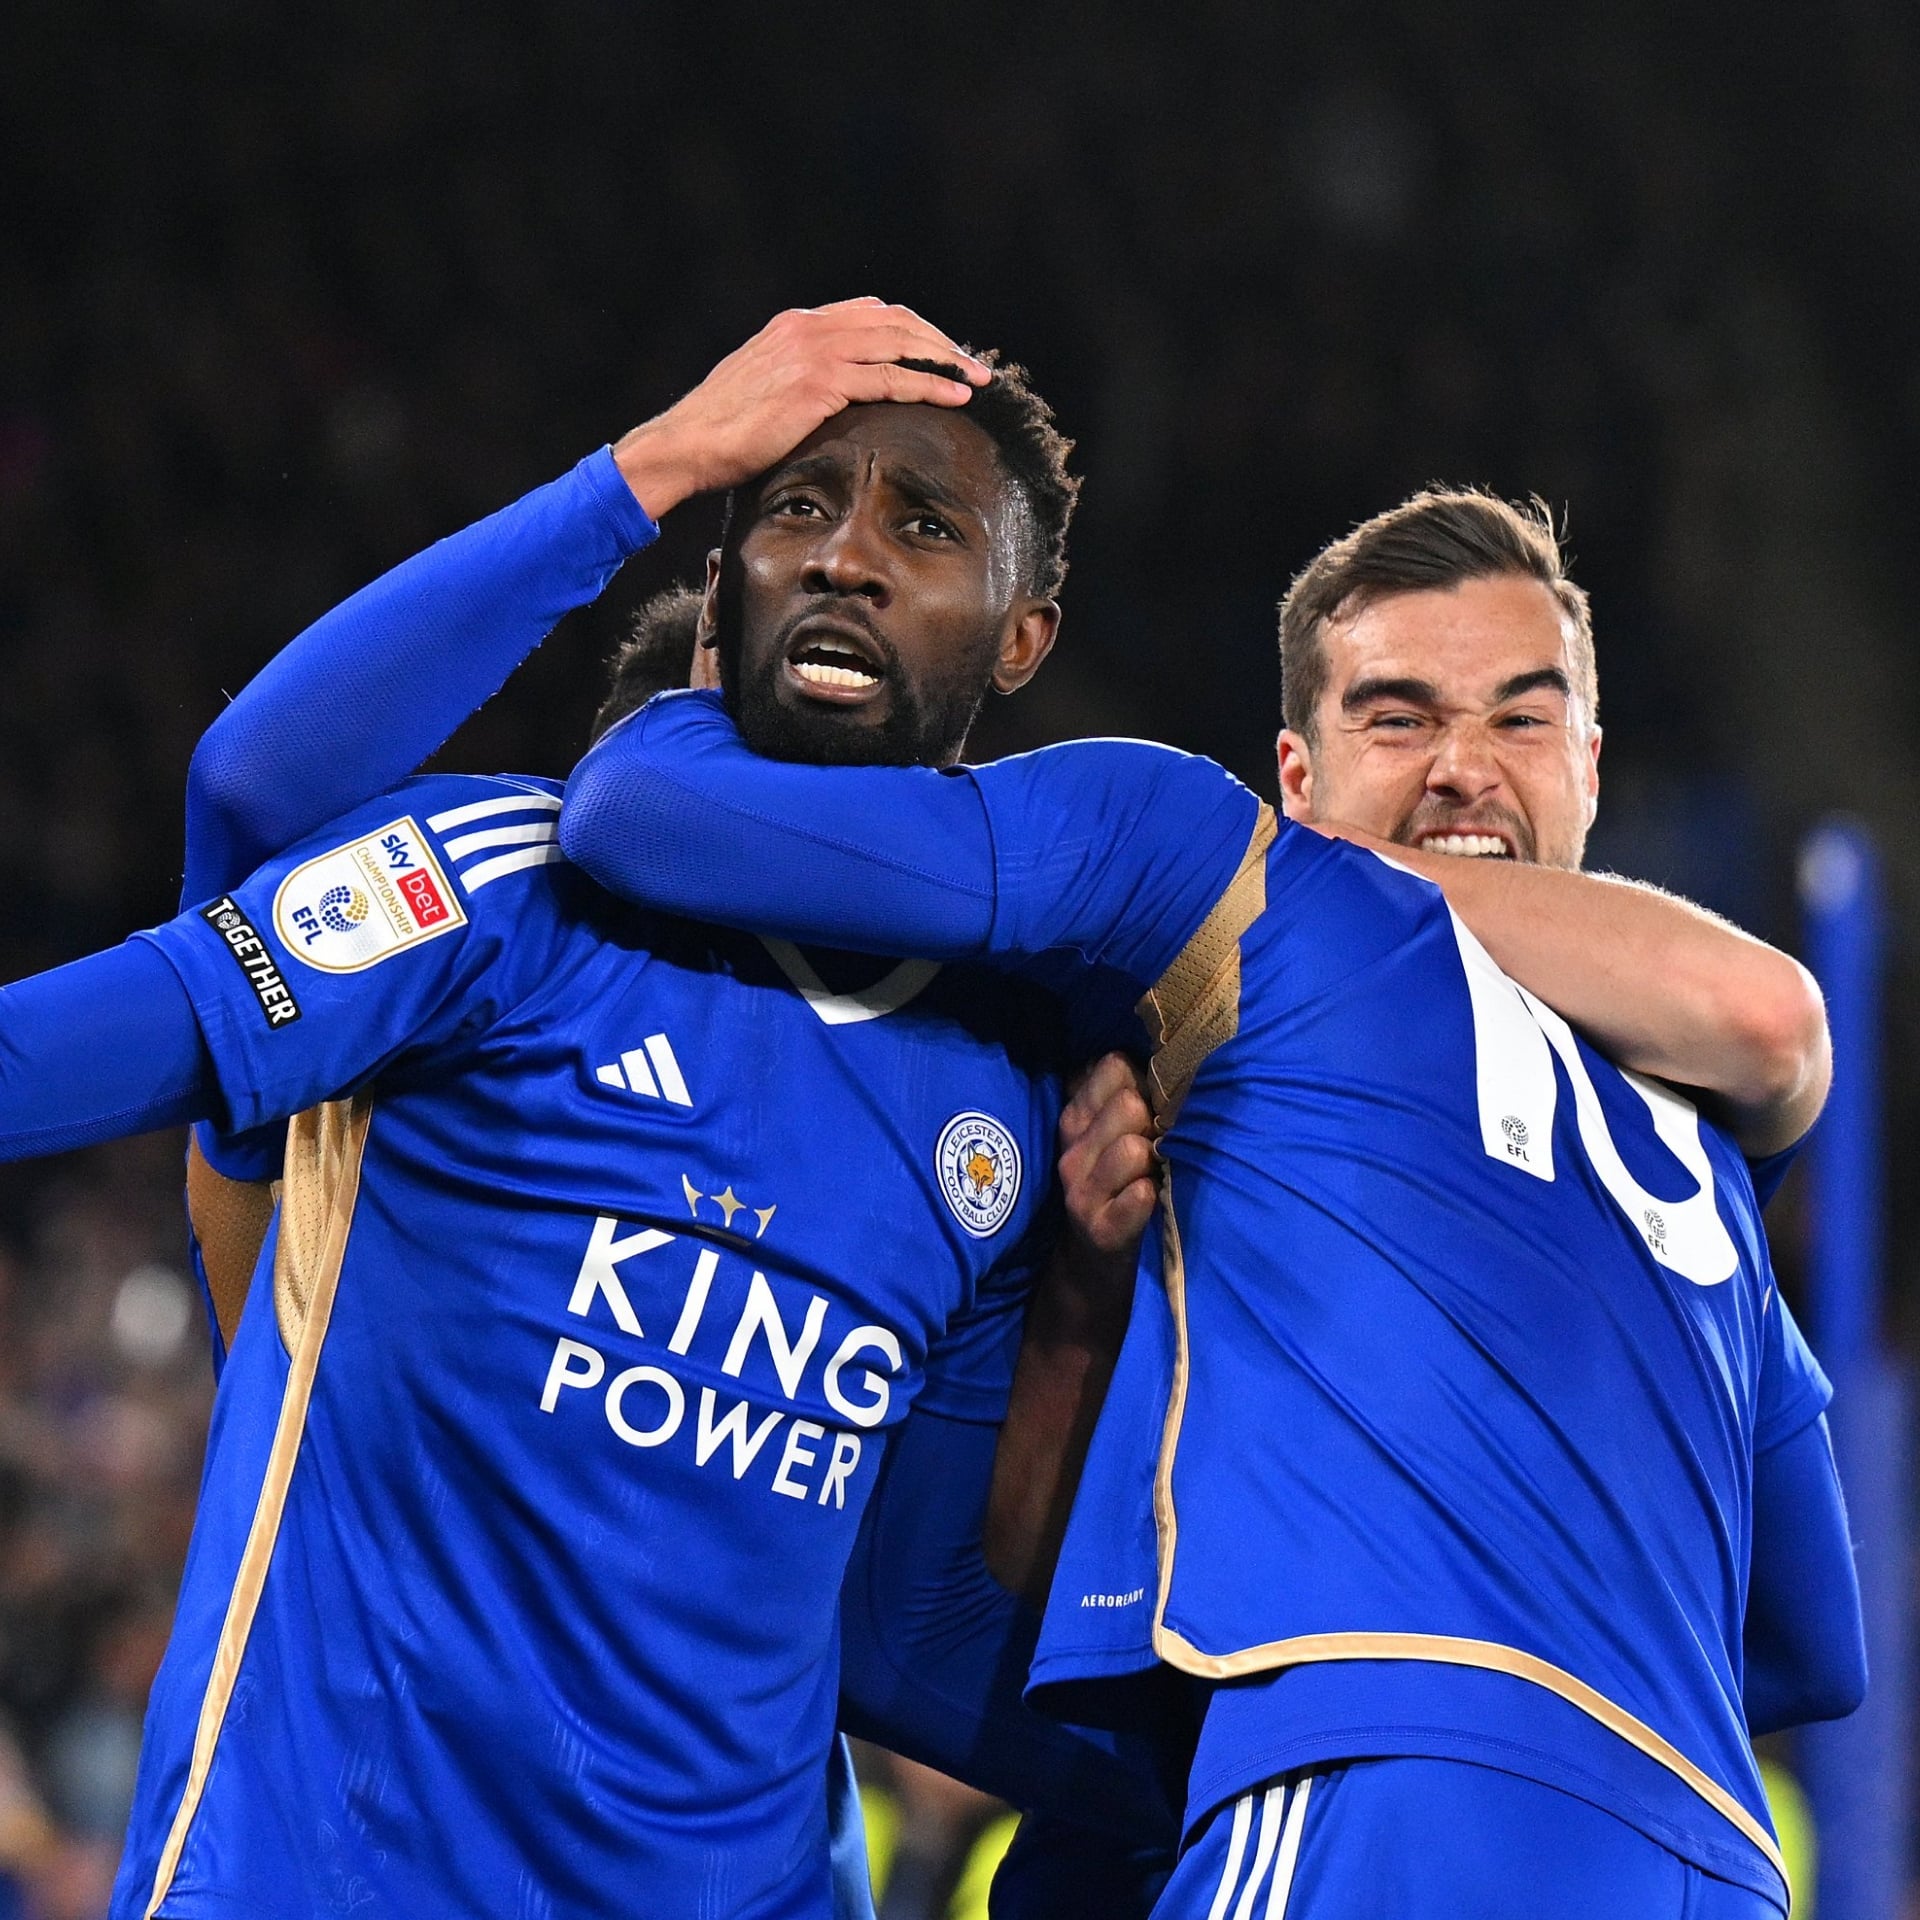 Ndidi sores back-to-back League goals as Leicester rout Southampton 5-0